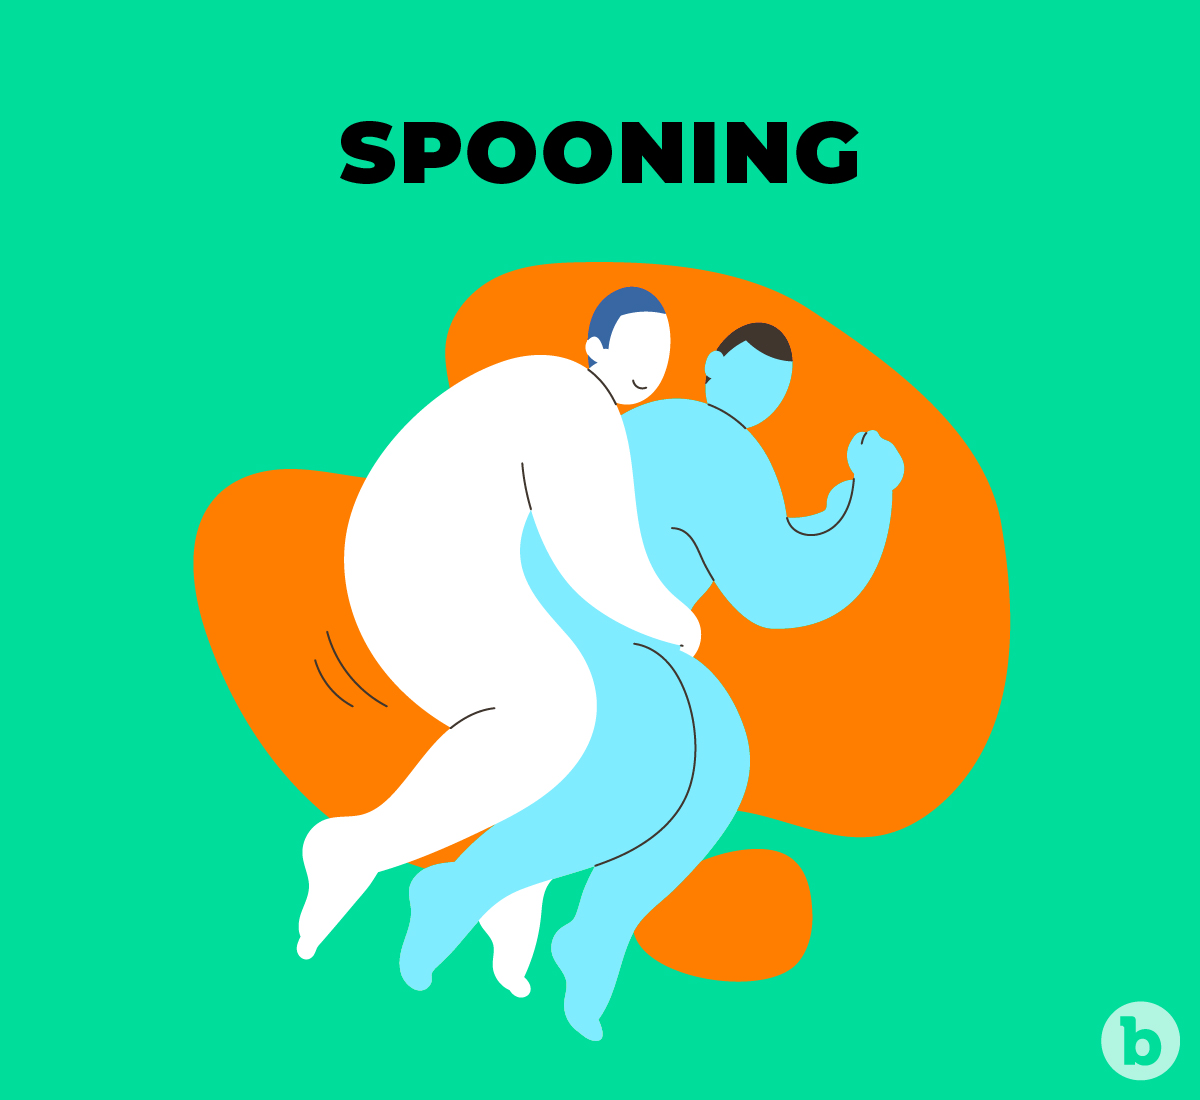 Spooning is one of the most comfortable positions when it comes to pegging